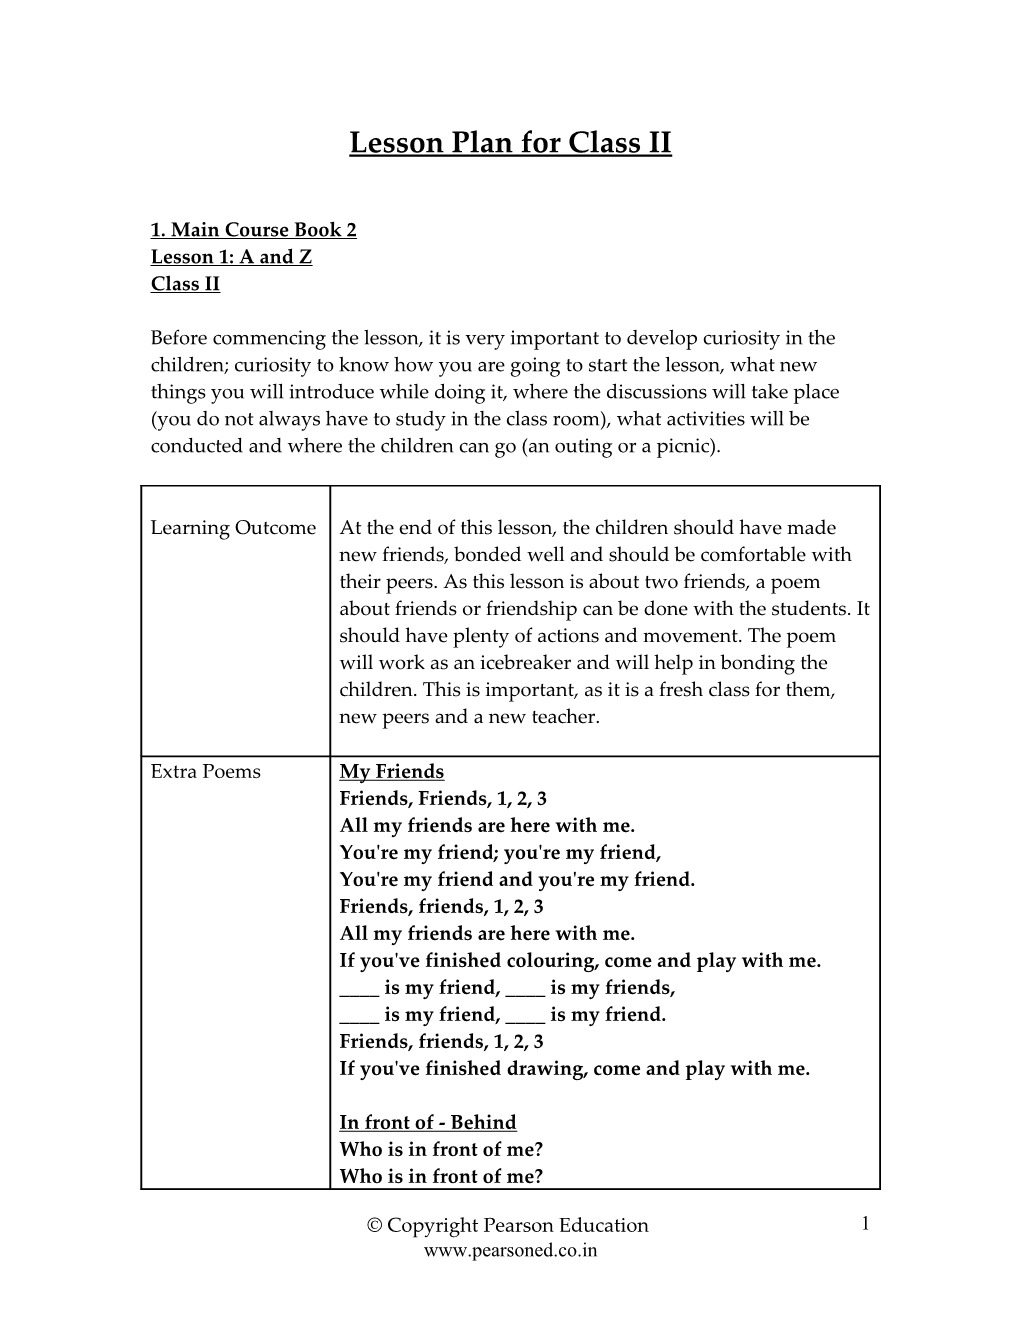 Lesson Plan for Patterns